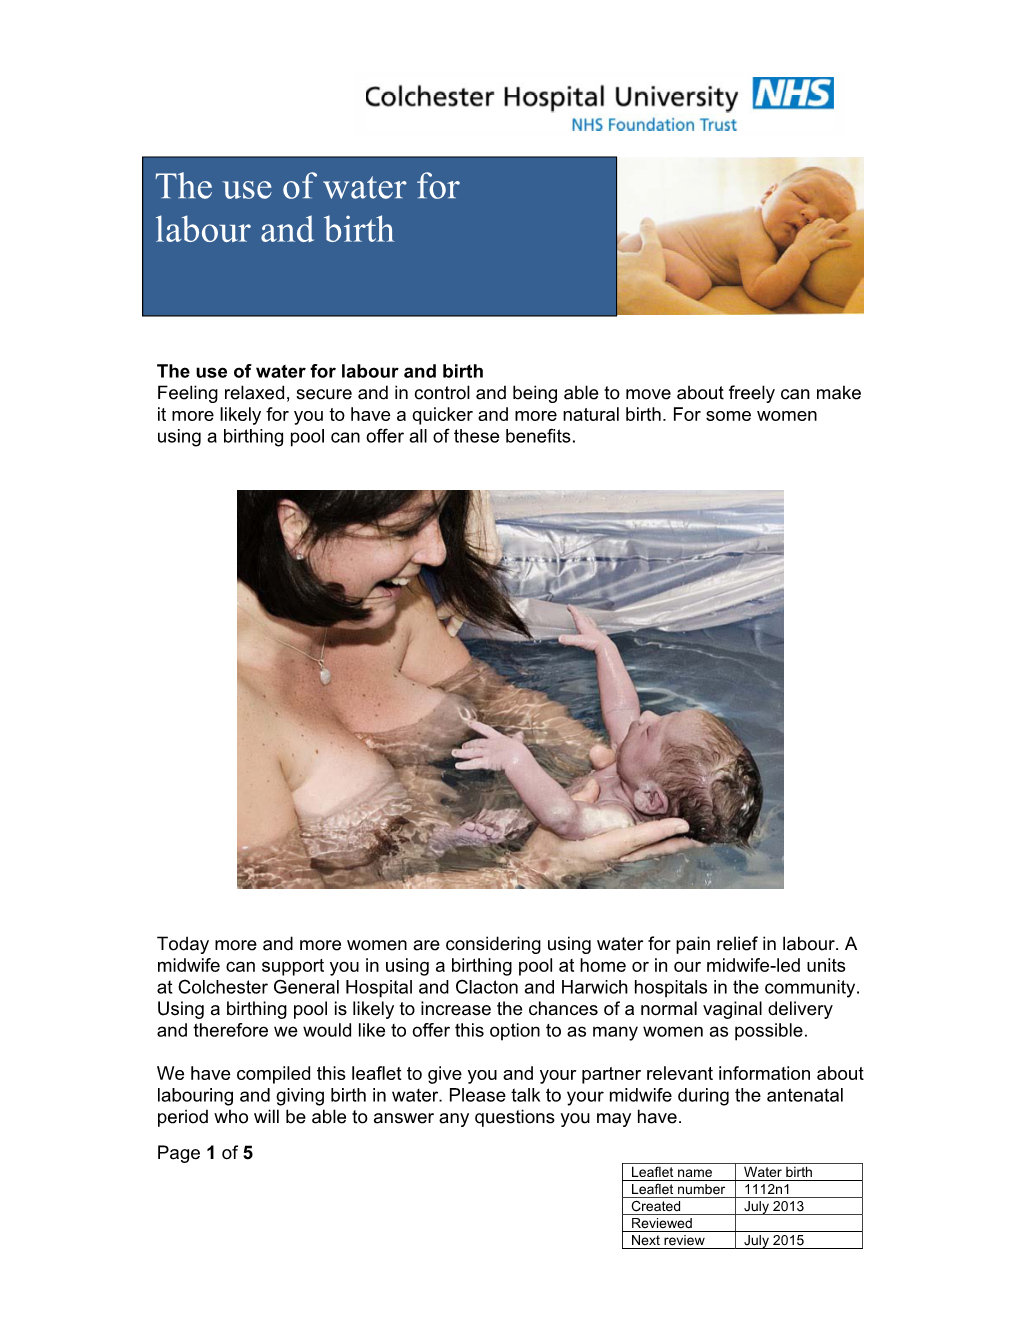 The Use of Water for Labour and Birth